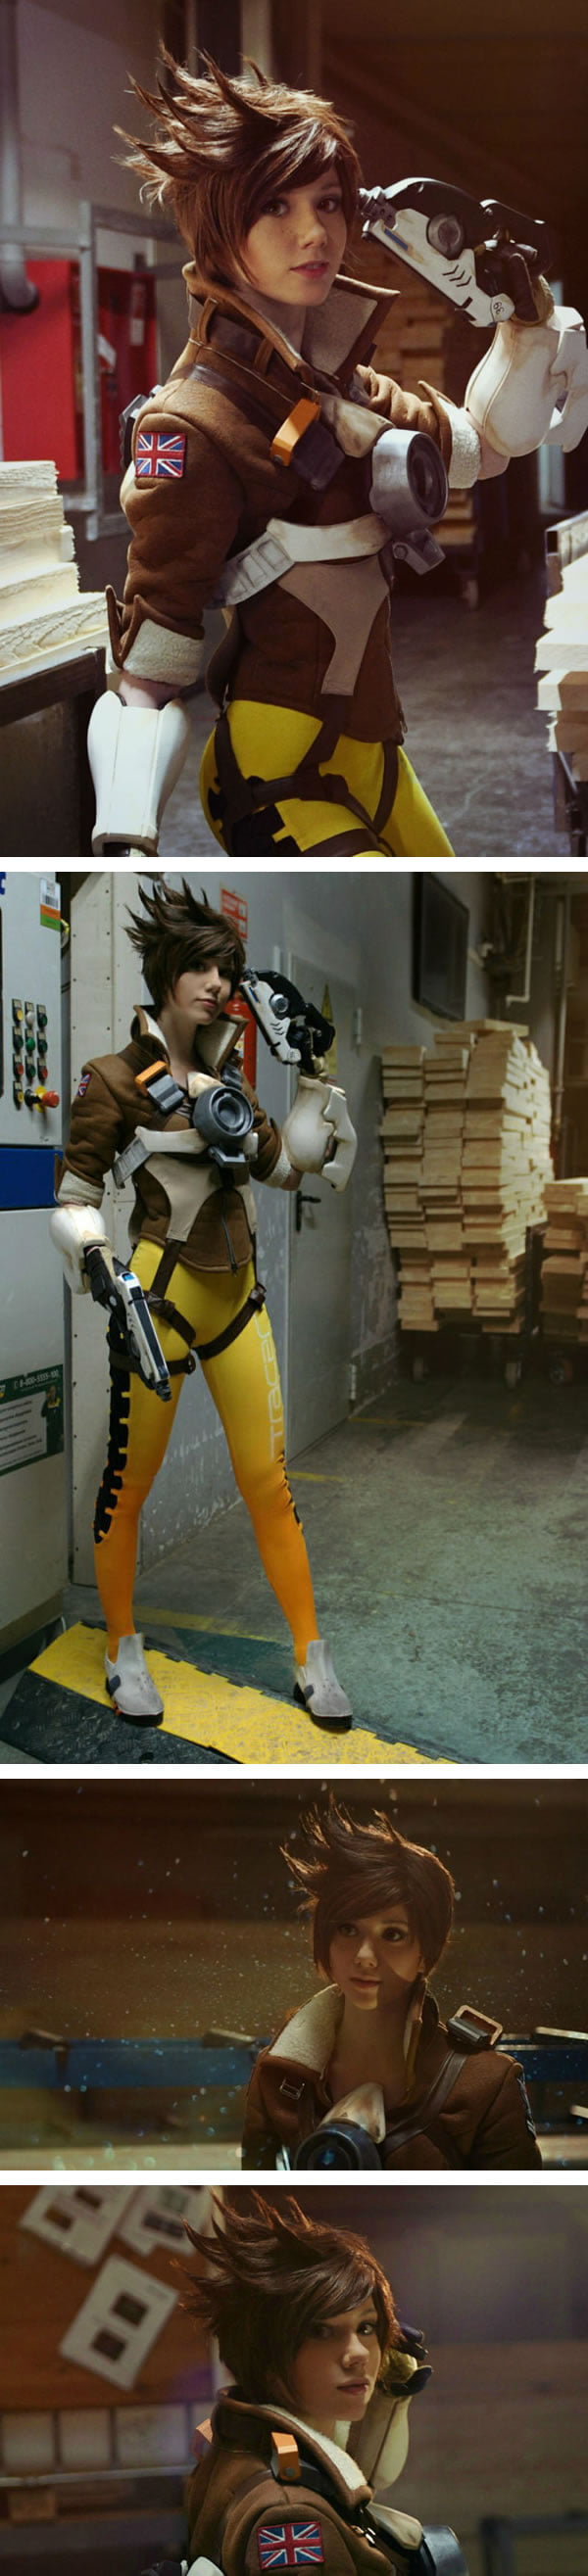 This Tracer cosplay by Hoteshi is almost perfect.